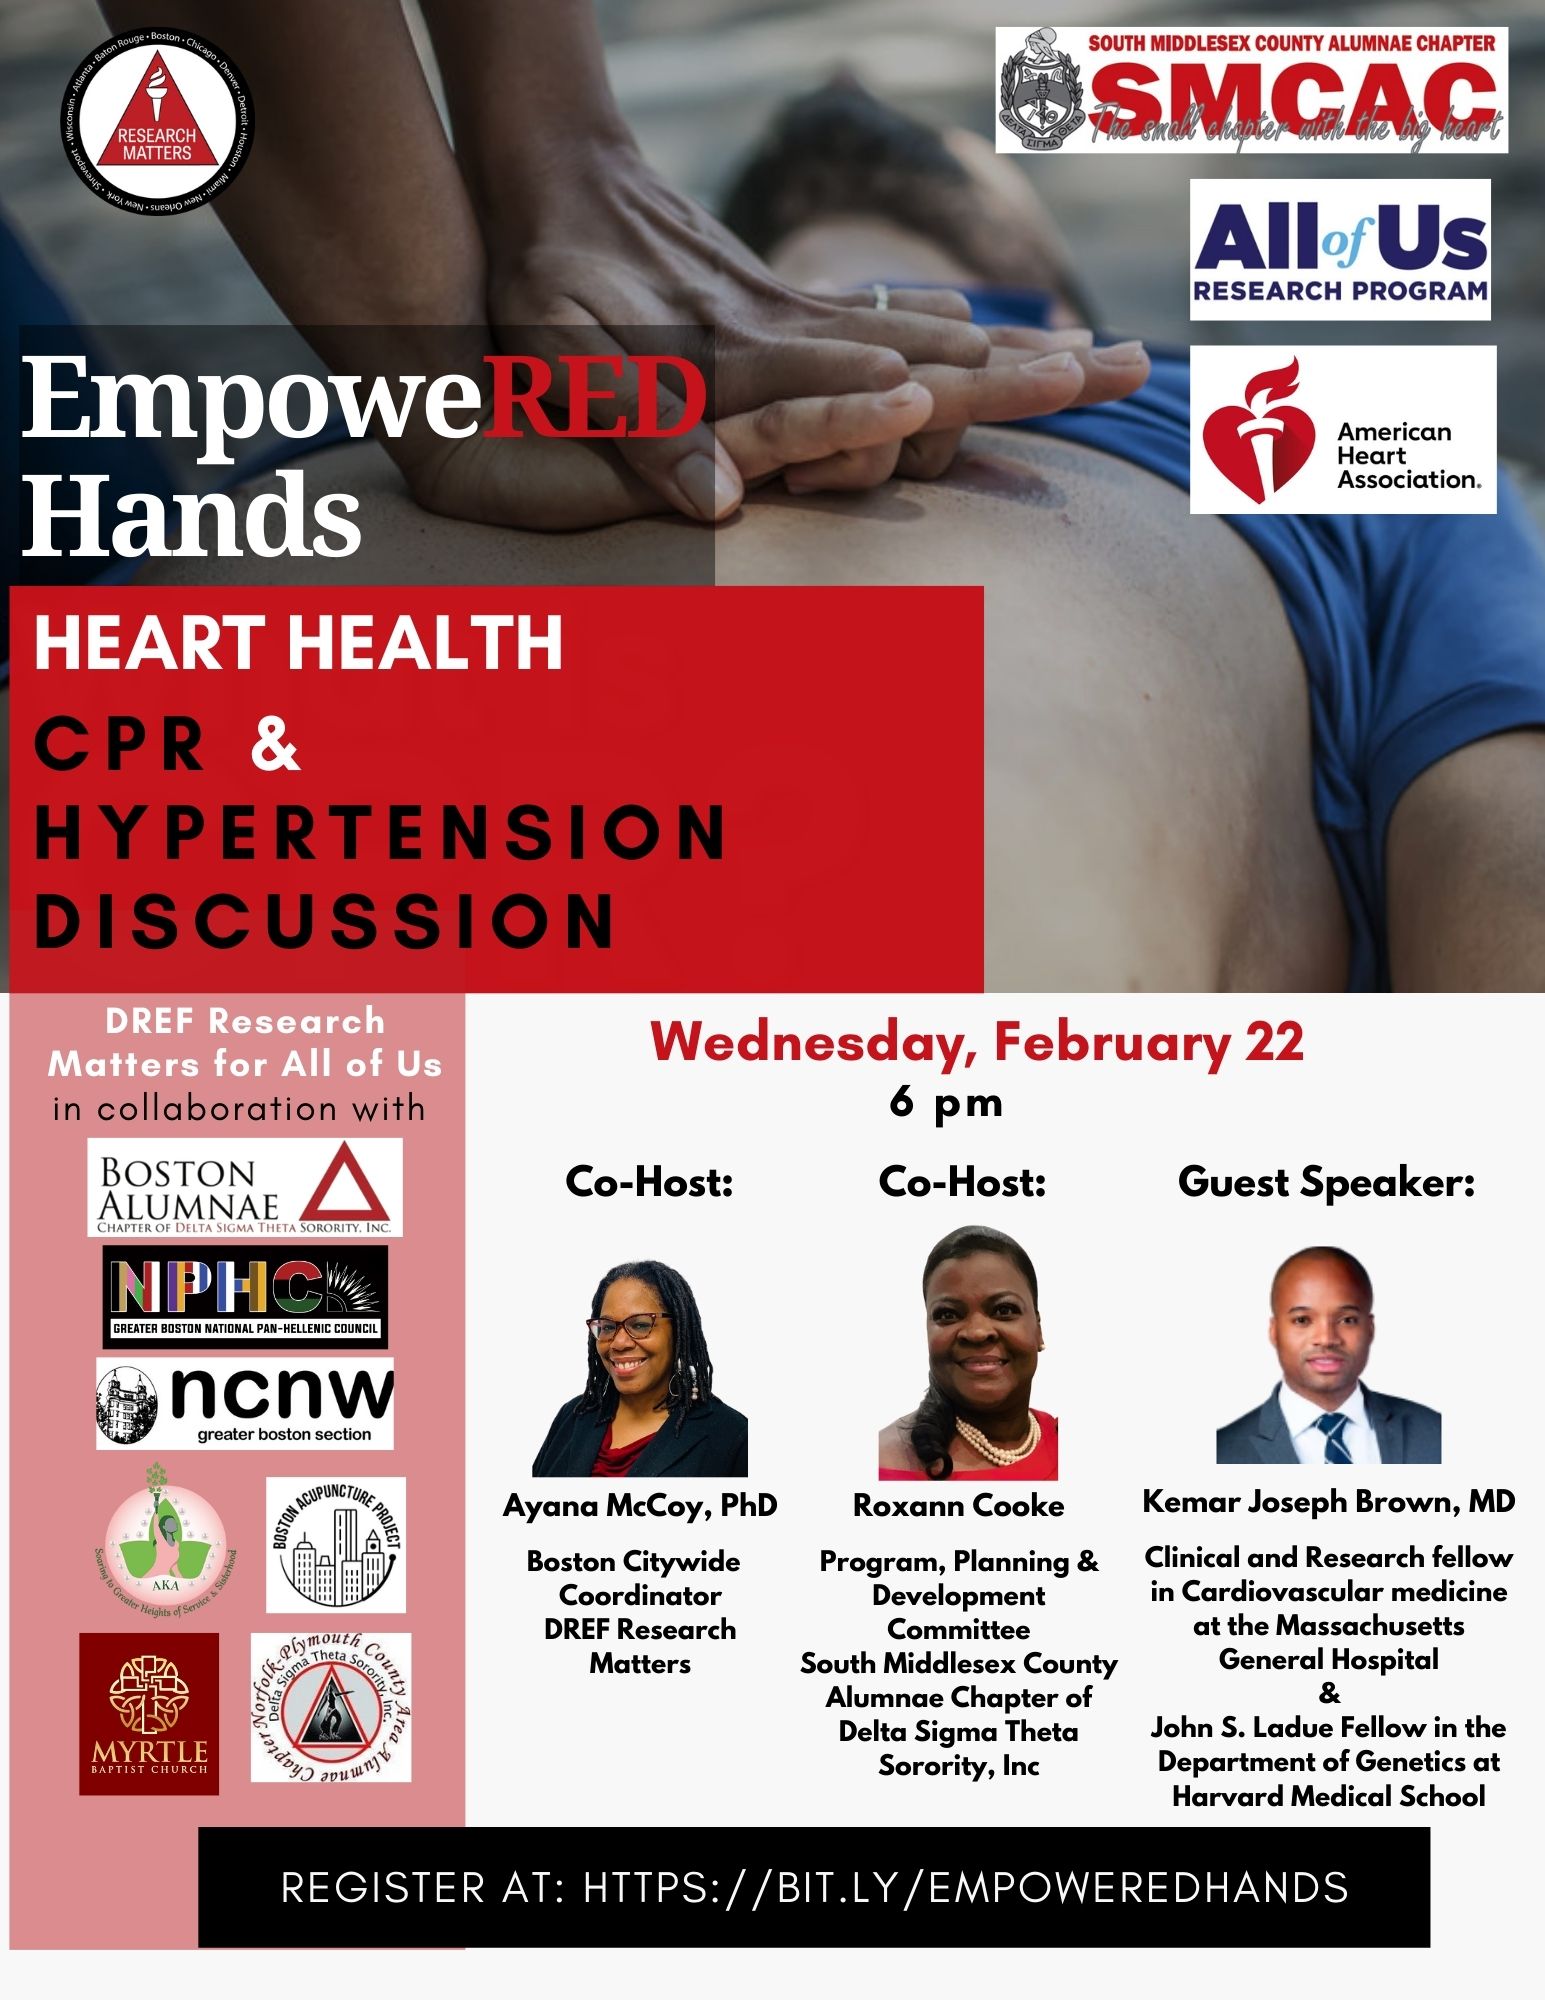 Title says EmpoweRED Hands: heart health, hypertension, and CPR discussion. Co-host: Ayana McCoy, PhD, Boston Citywide Coordinator, DREF Research Matters. Co-host: Roxann Cooke, Program, Planning and Development Committee, South Middlesex County Alumnae Chapter of Delta Sigma Thera Sorority, Inc. Guest Speaker: Kemar Joseph Brown, M.D. Clinical and Research Fellow in Cardiovascular Medicine at the Massachusetts General Hospital and John S. Ladue Fellow in the Department of Genetics at Harvard Medical School. DREF Research Matters for All Of Us in collaboration with Boston Alumnae Chapter of Delta Sigma Theta Sorority Inc. Greater Boston National Pan-Hellenic Council. NCNW Greater Boston. Myrtle Baptist Church. Delta Sigma Theta Sorority Norfolk-Plymouth County Area Alumnae Association. Boston Acupuncture Project. Registration link.